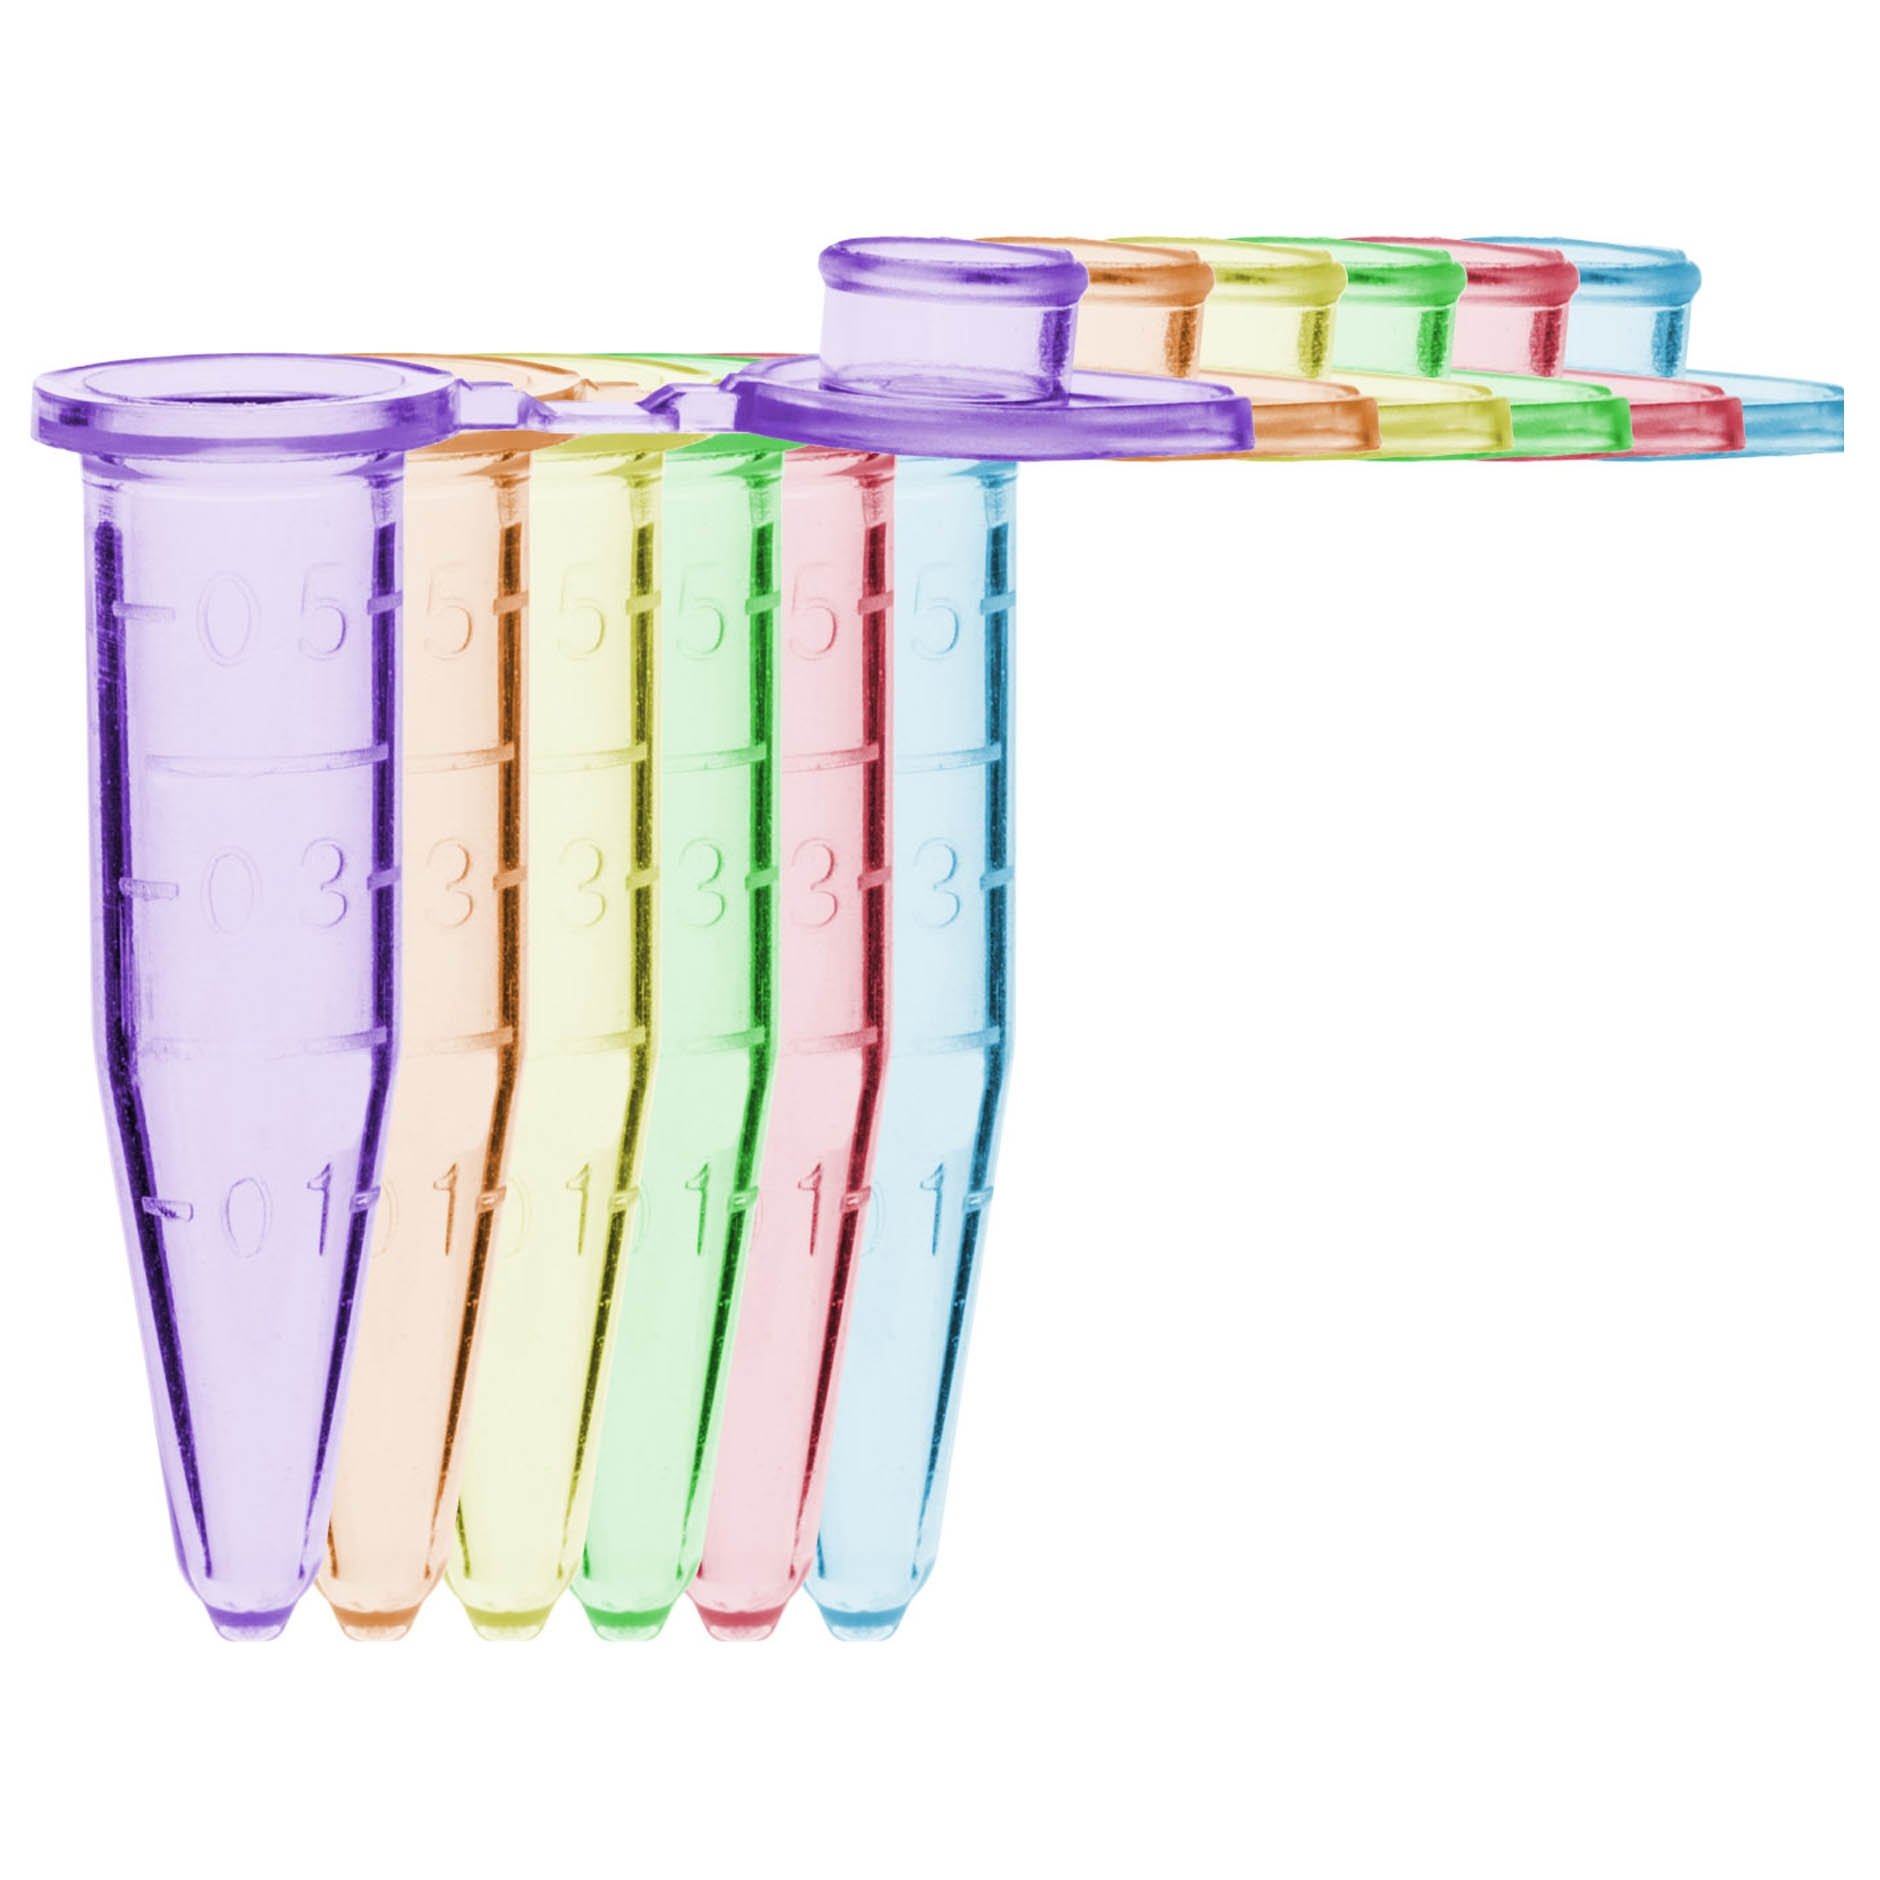 SureSeal S 0.5mL Sterile Microcentrifuge Tube - Assorted Colors (10 Packs of 500/Pack)